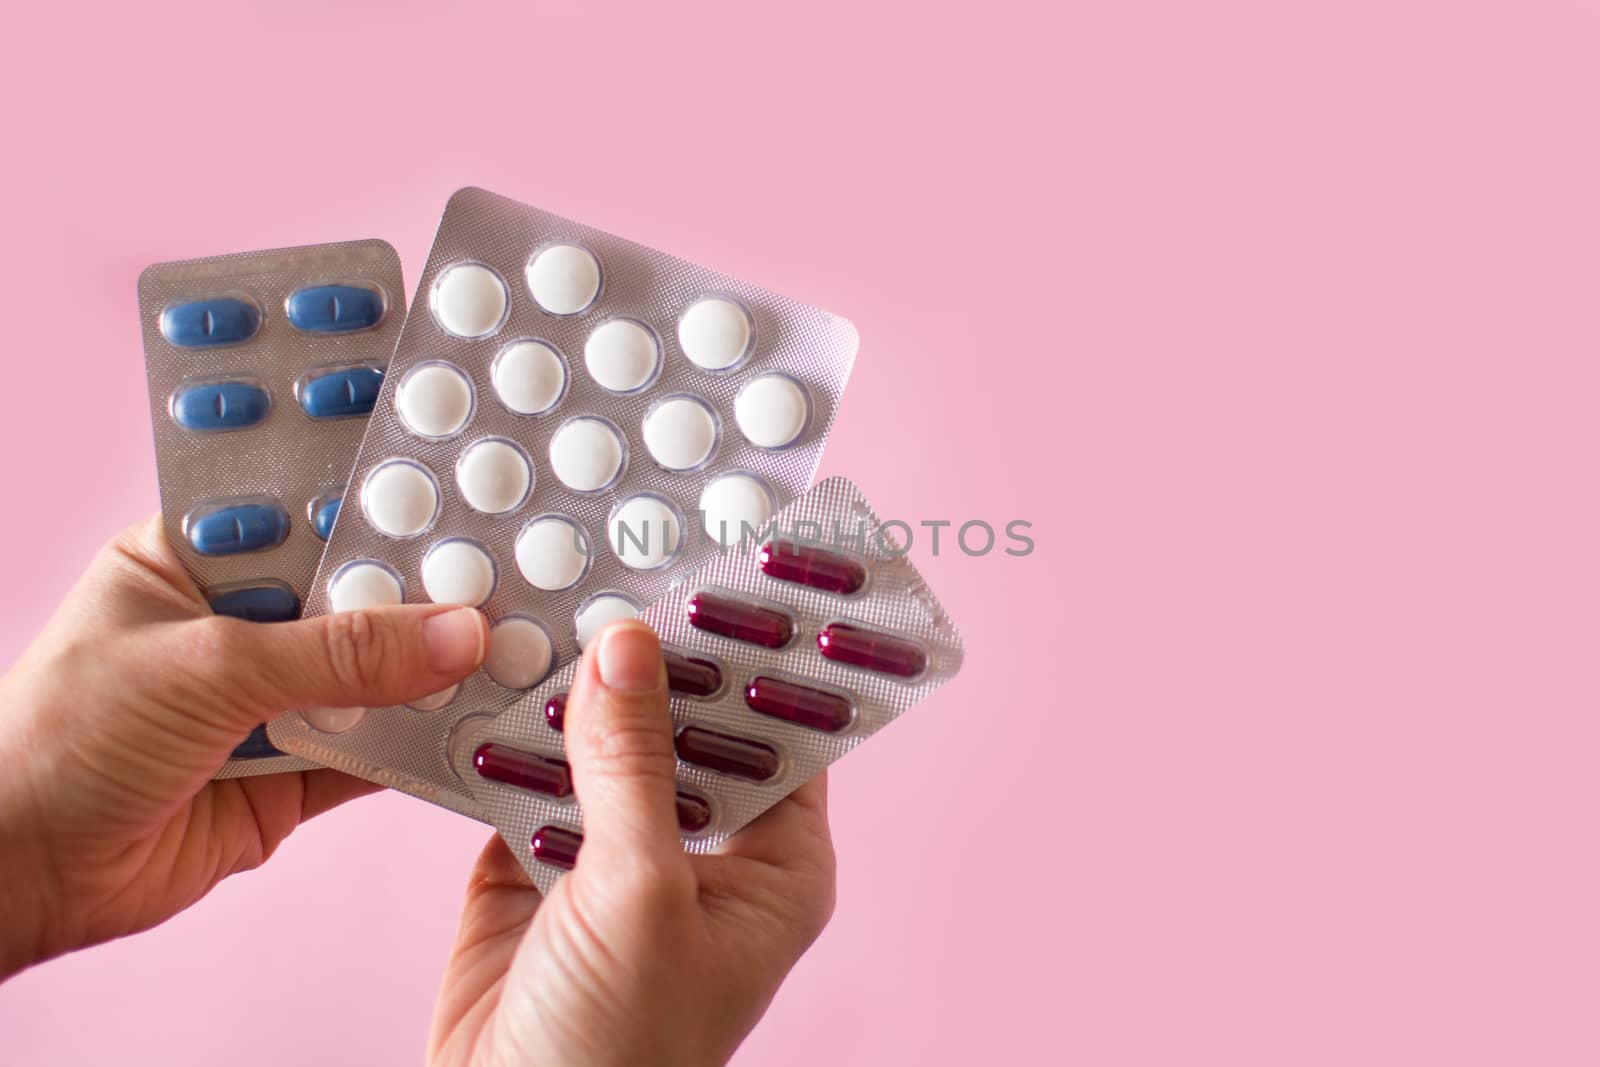 Female hand holding medical pills on pink background